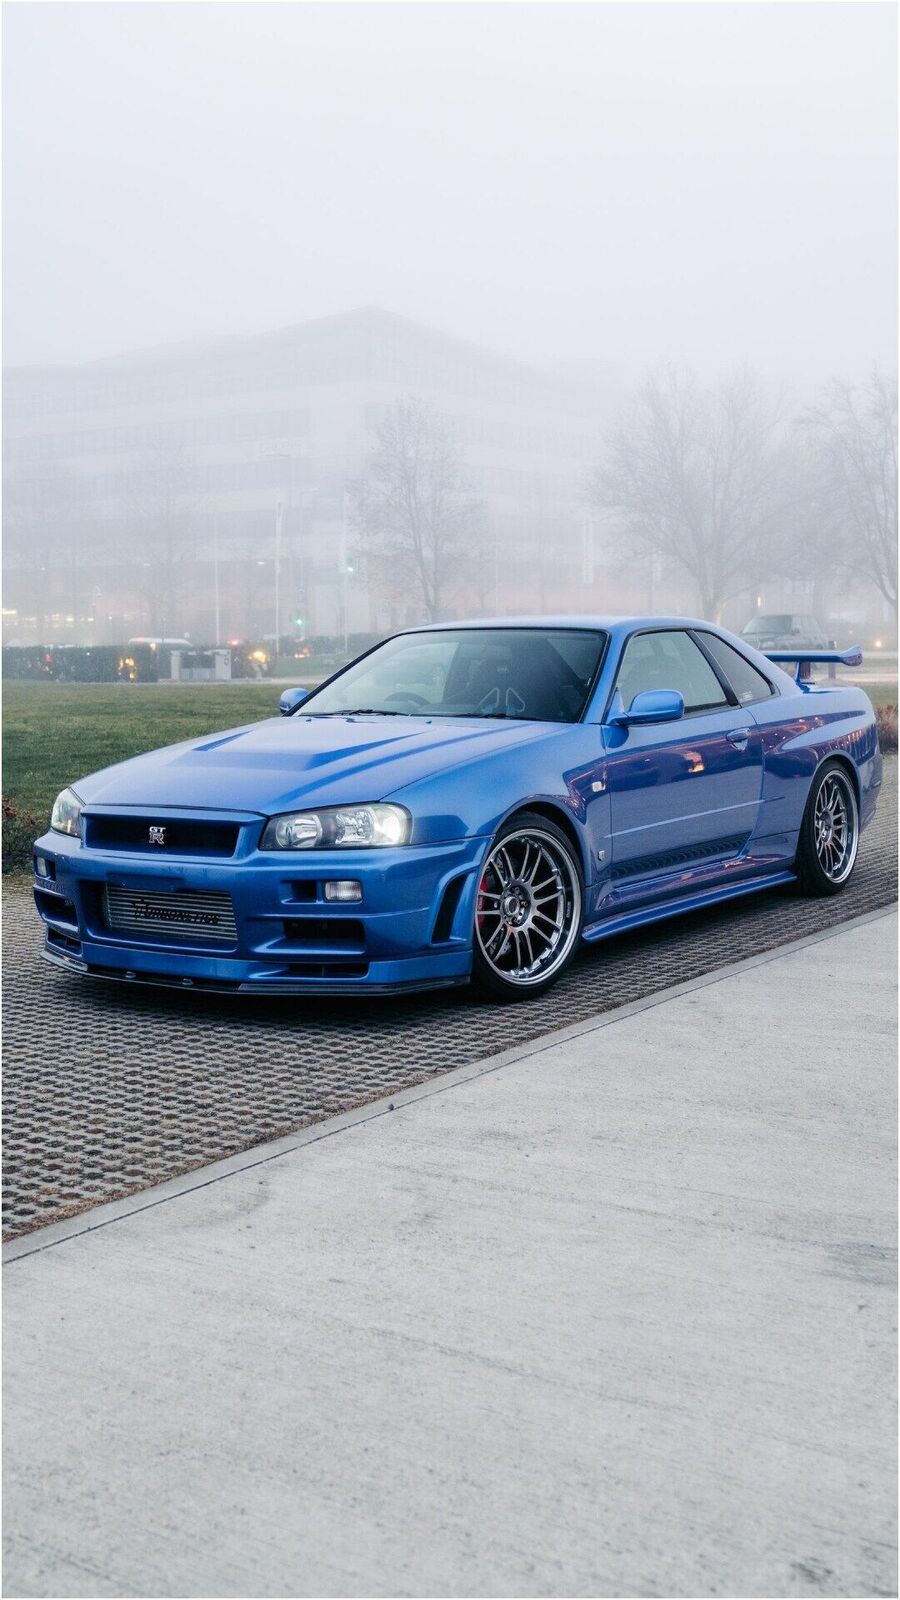 Paul Walker's 'Fast and Furious' Nissan Skyline R34 GT-R Goes Up